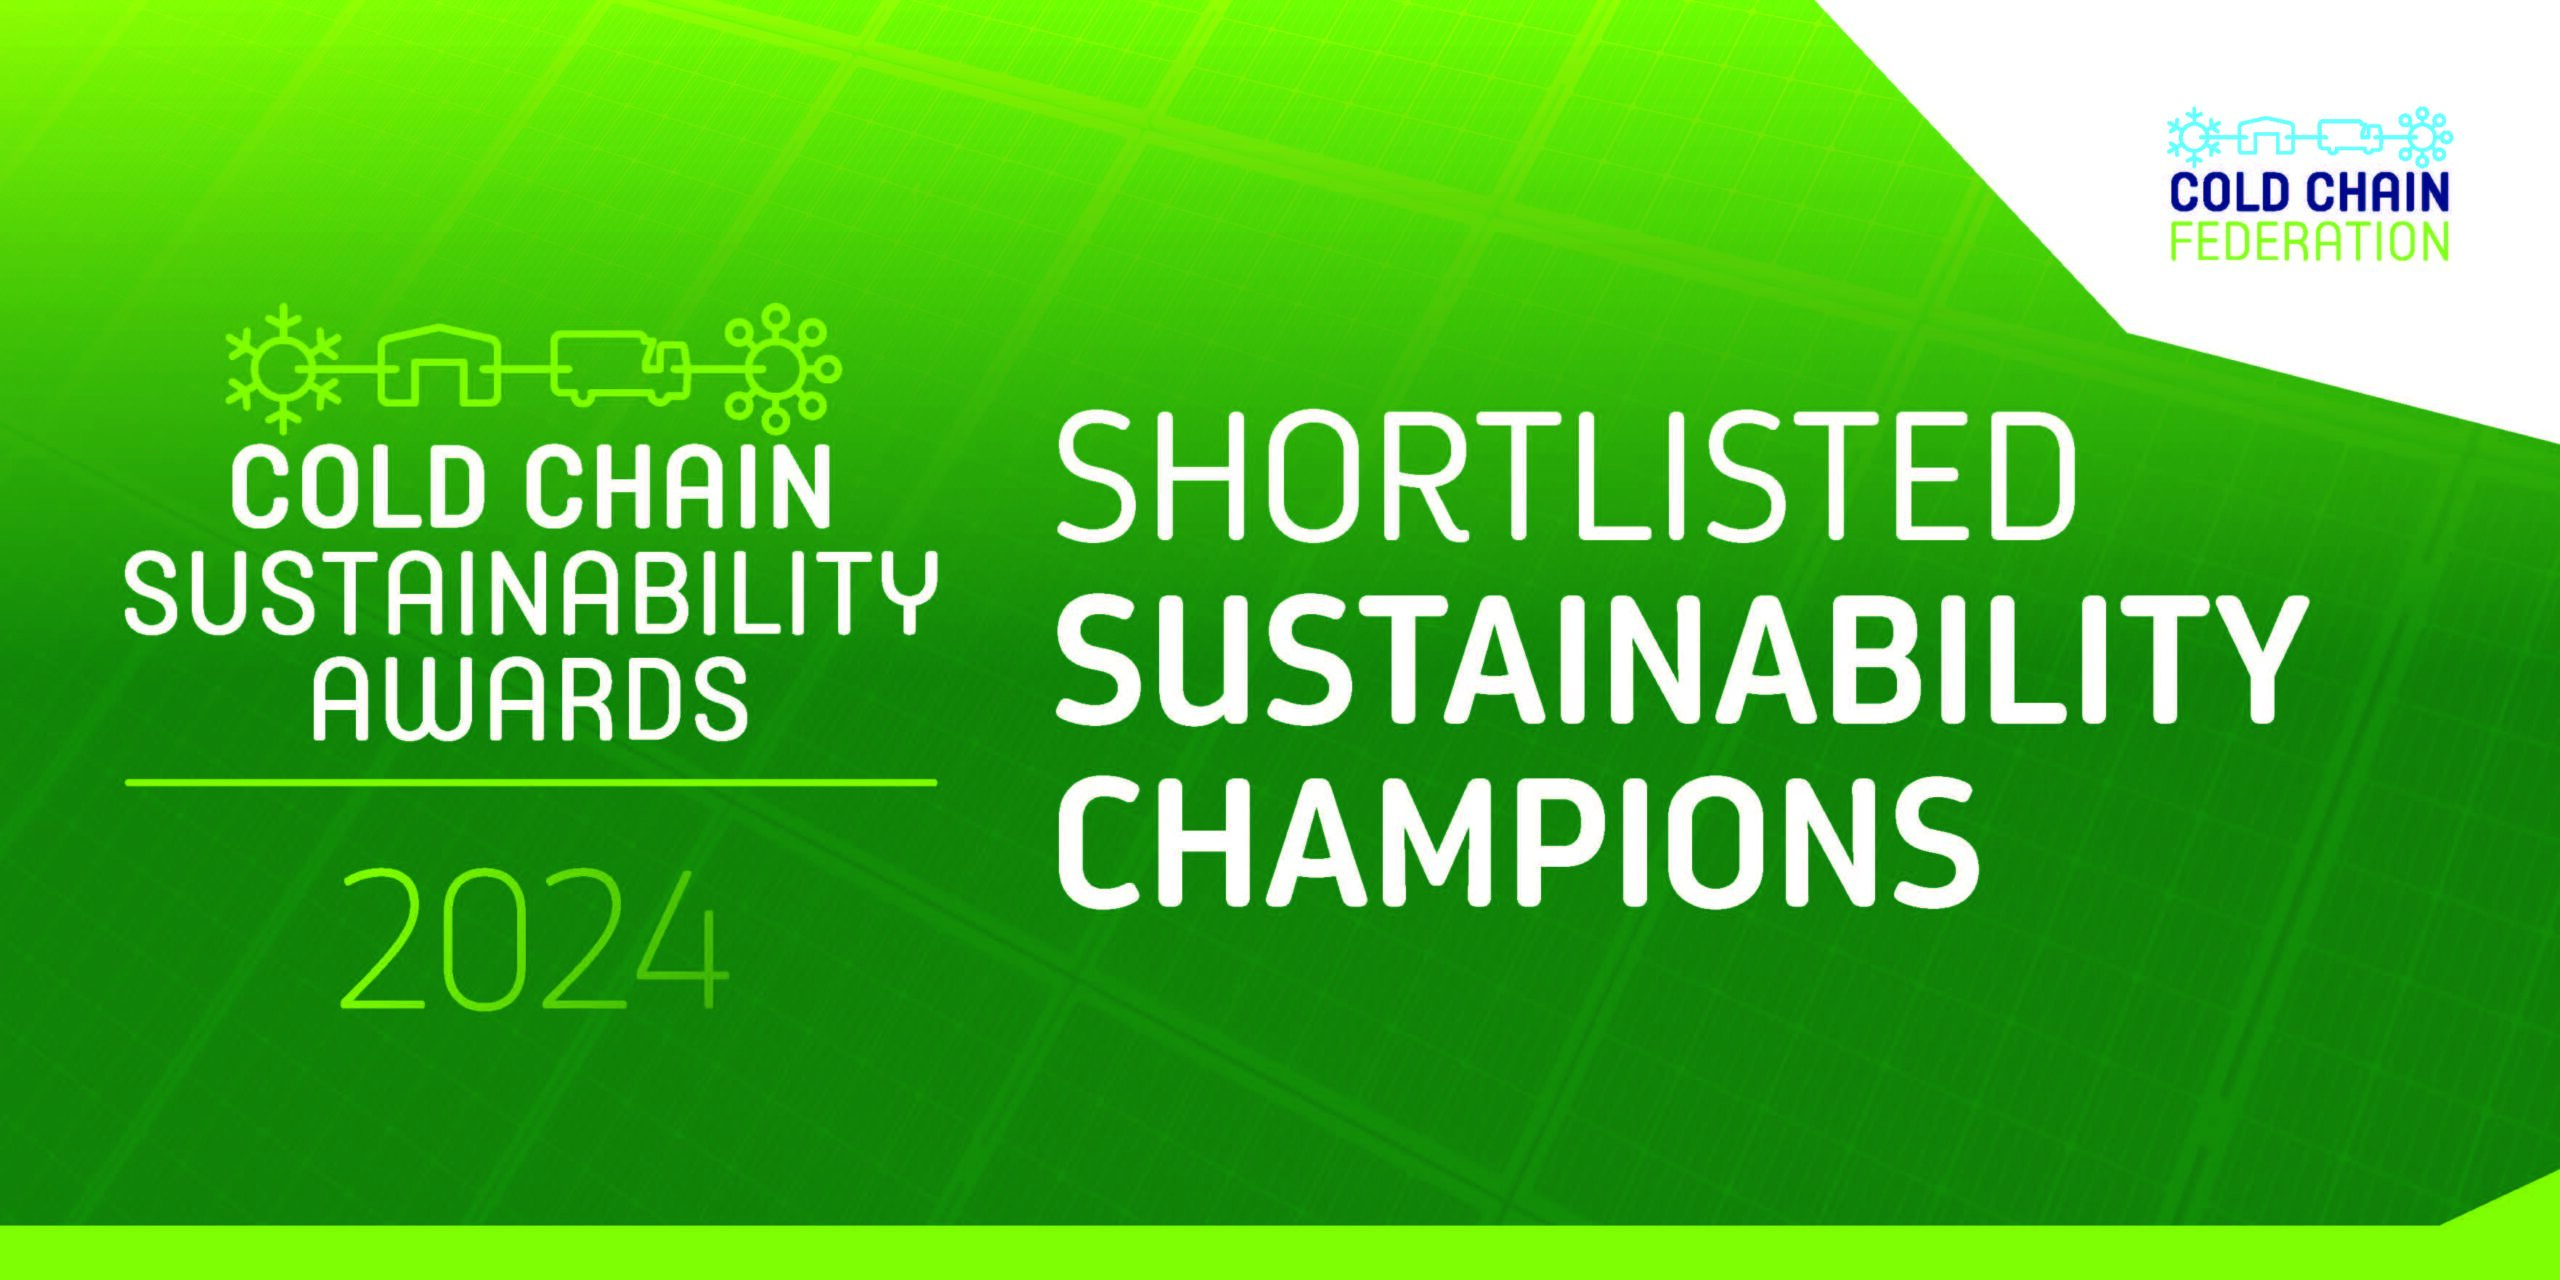 Cold chain awards shortlisted sustainability champtions